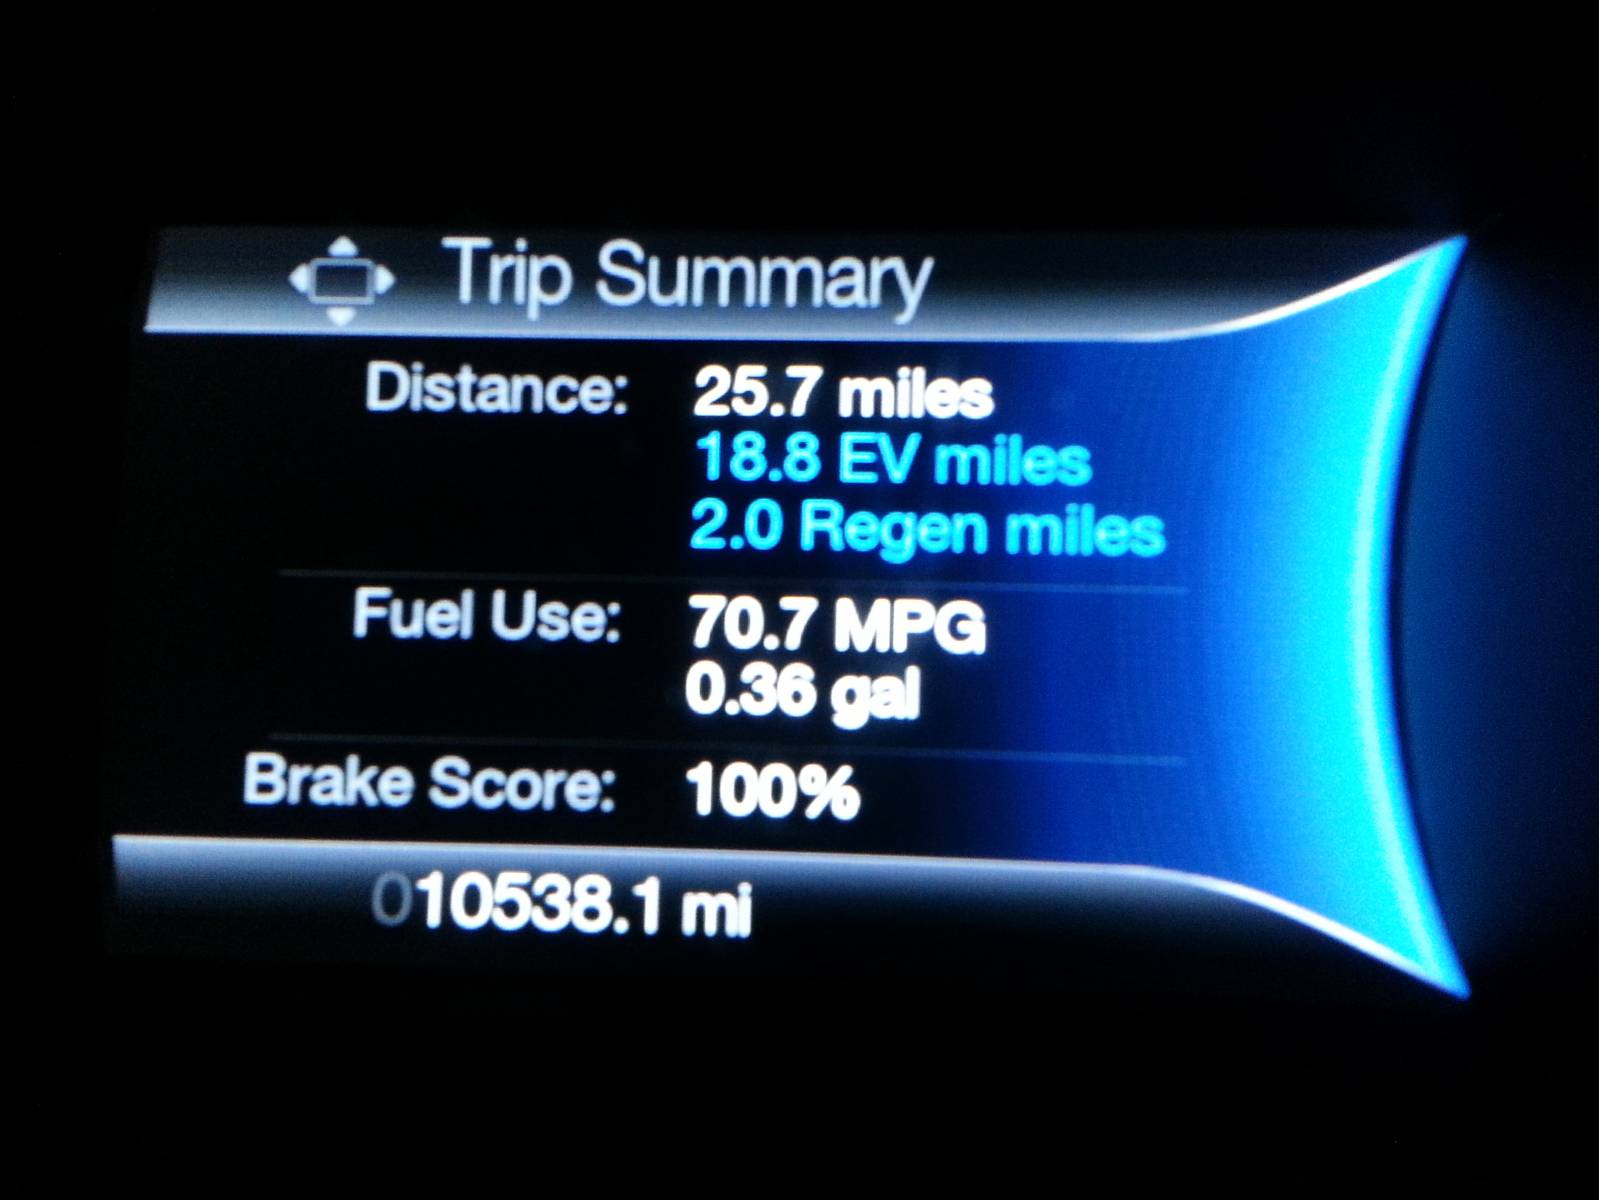 My Record for >10 Mile Trip